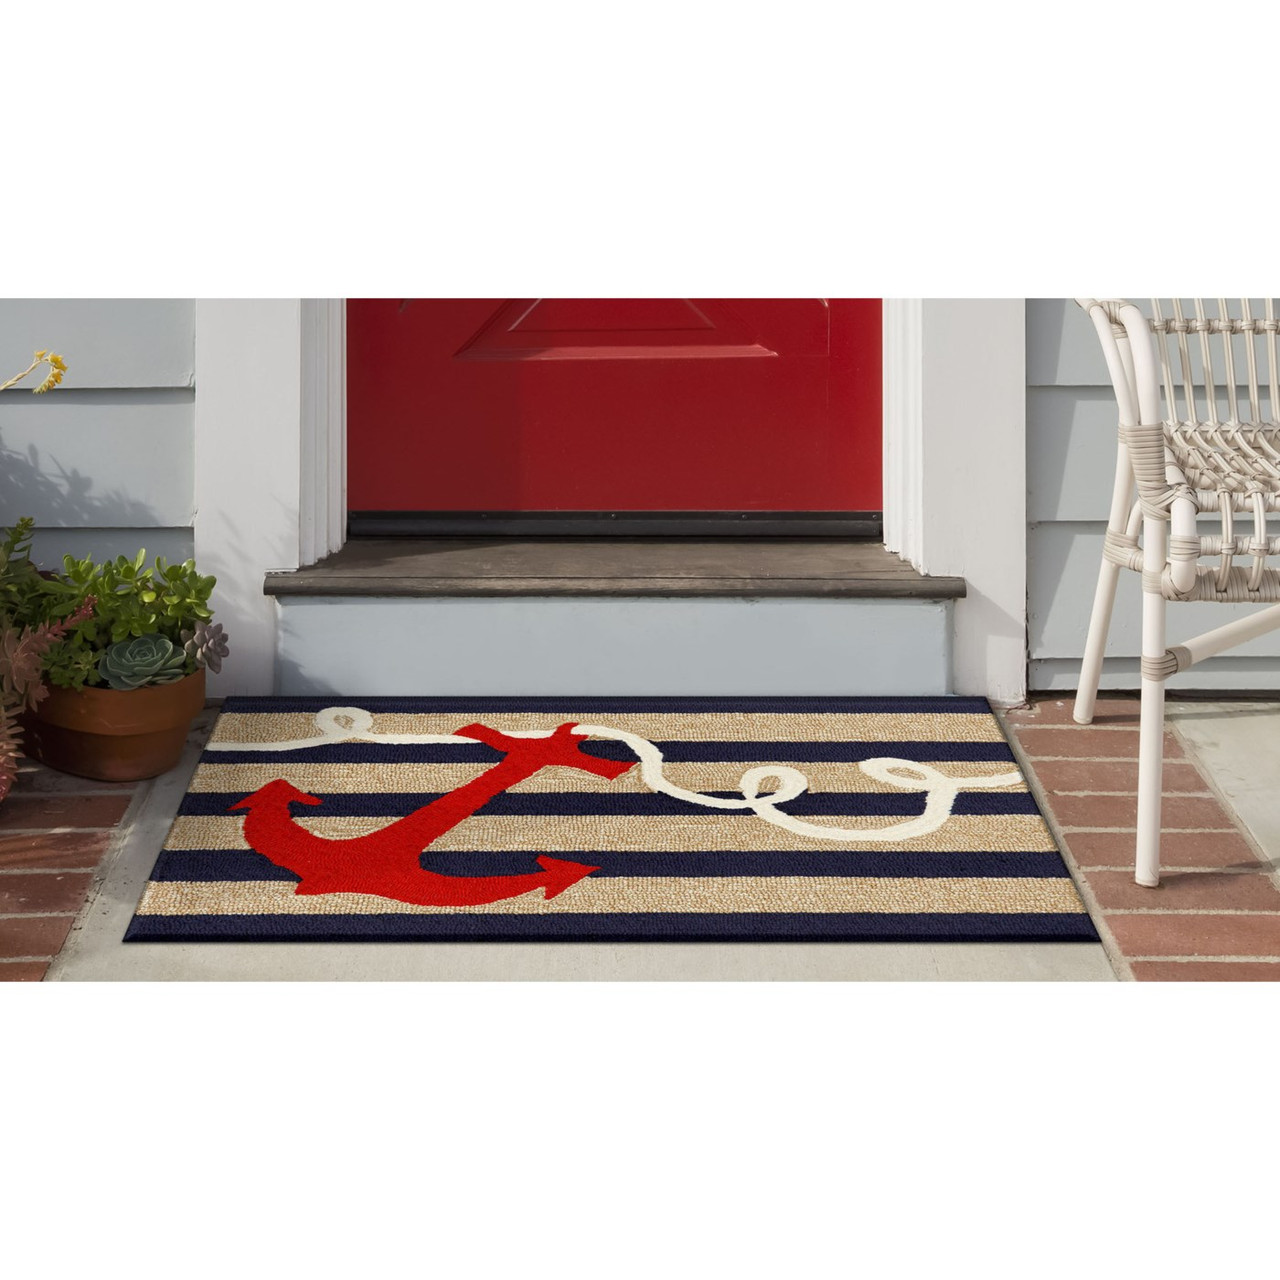 Frontporch Anchor Indoor/Outdoor Rug - Navy - 6 Sizes - Lifestyle